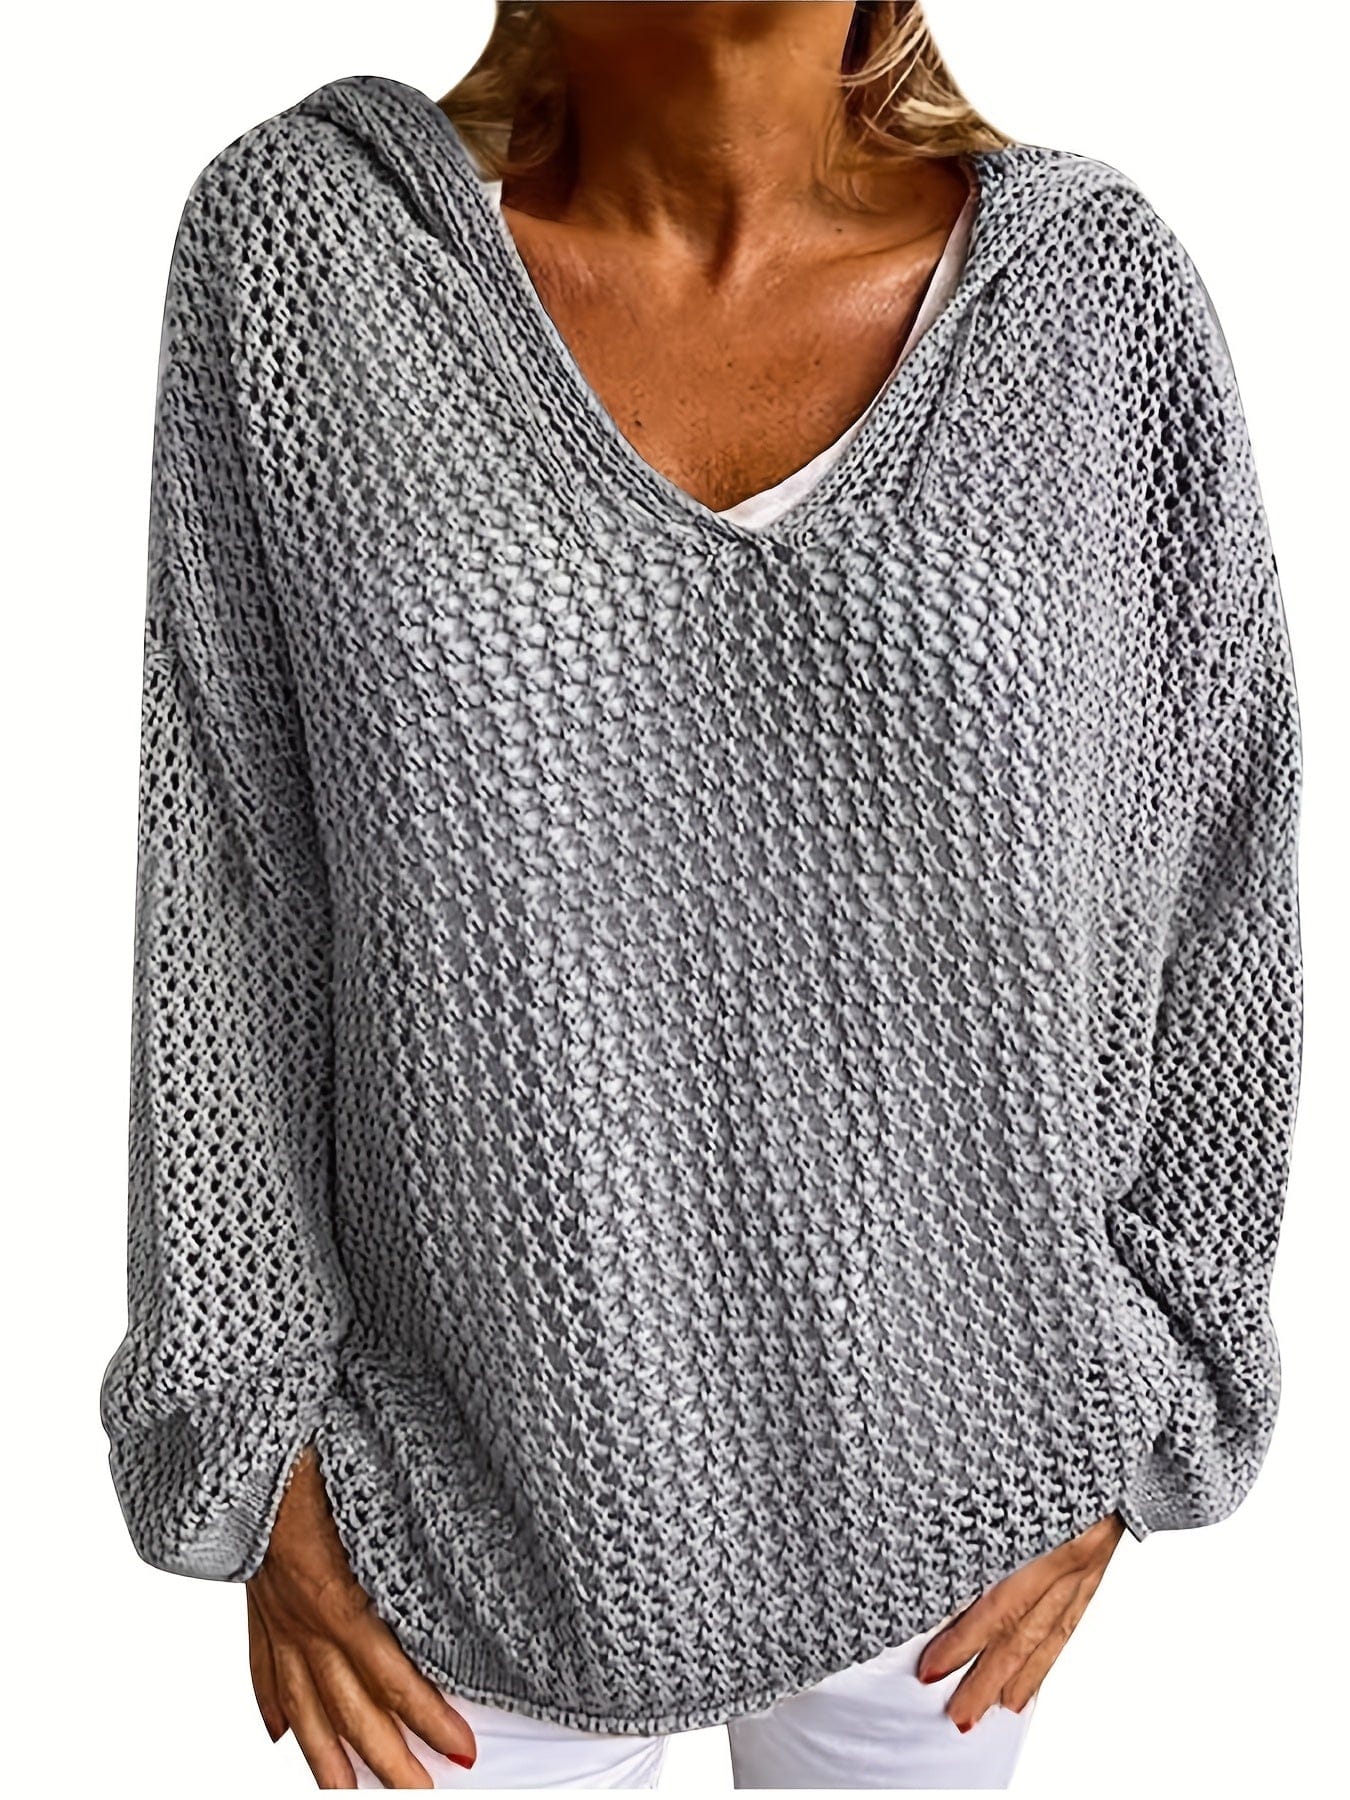 Plus Size Casual Sweater, Women's Plus Solid Long Sleeve Slight Stretch Hooded Sweater PLU2309A2816GRE1XL(14) Gray / 1XL(14)